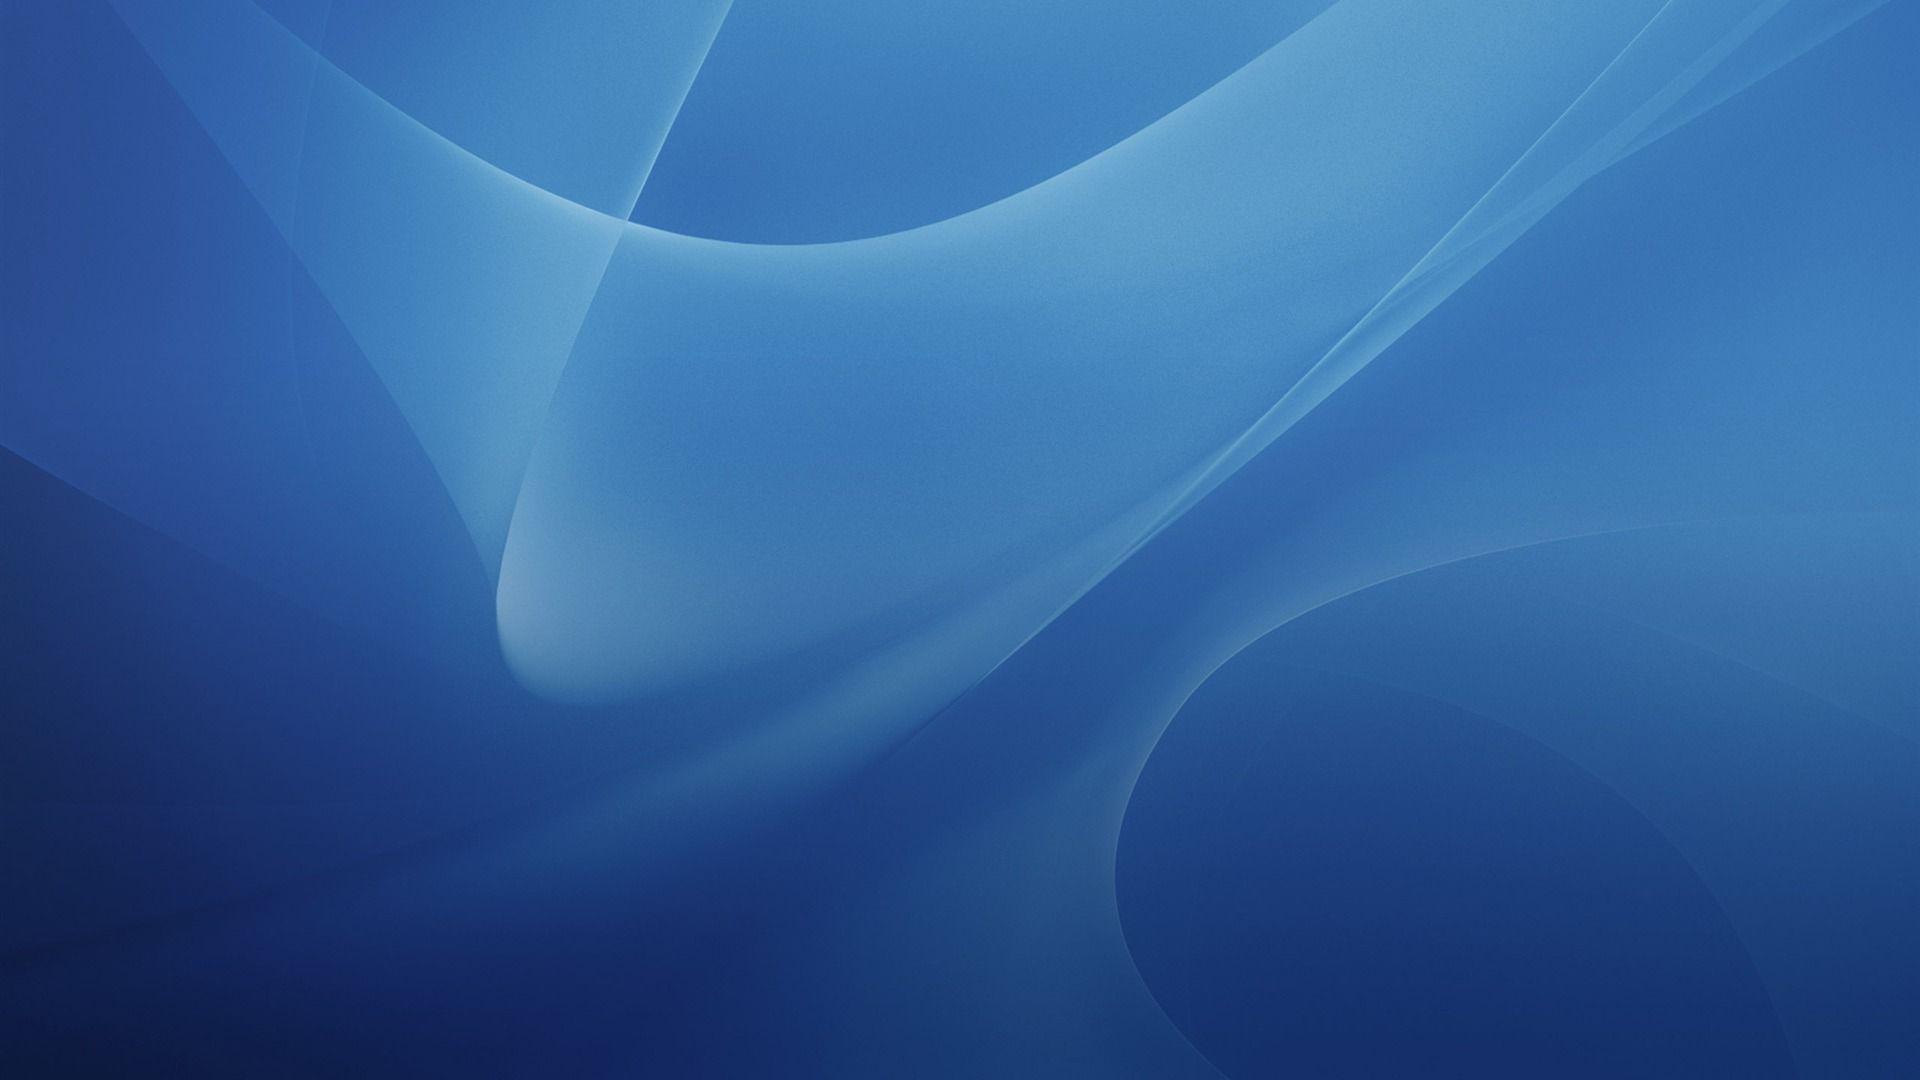 Mac Os X Hd Wallpapers 21773 Wallpapers